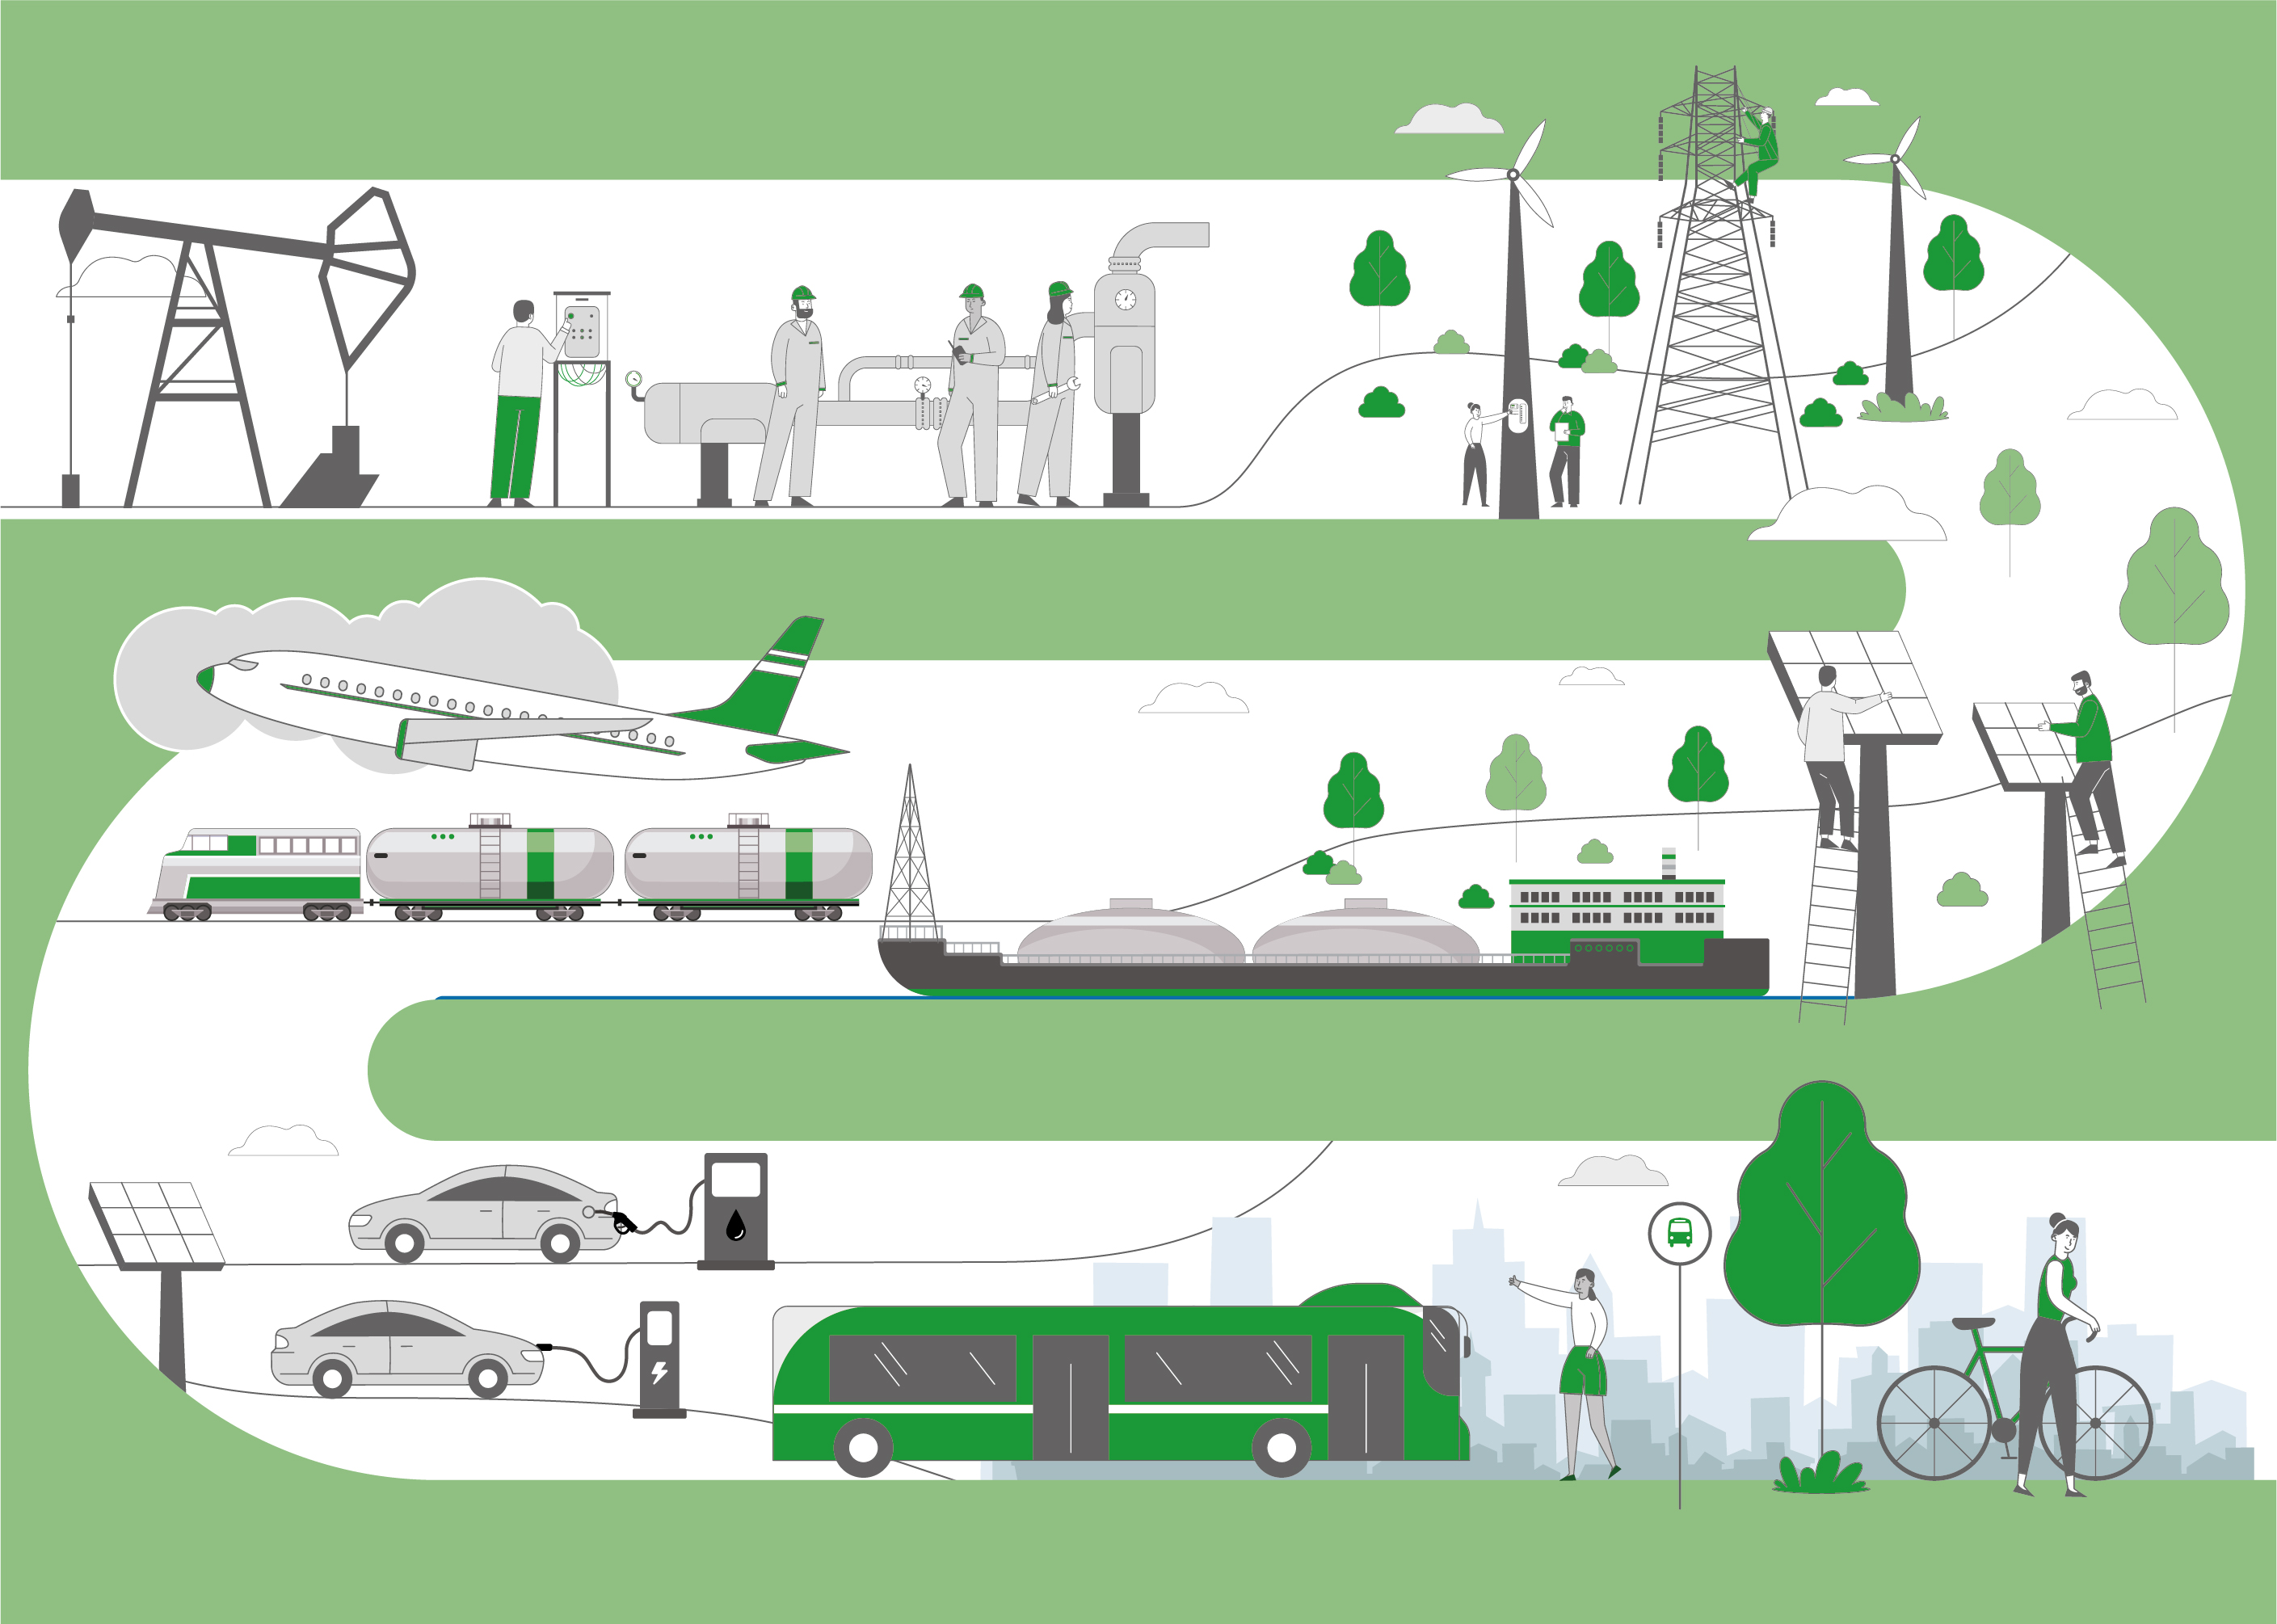 Various energy transition icons and modes of transportation